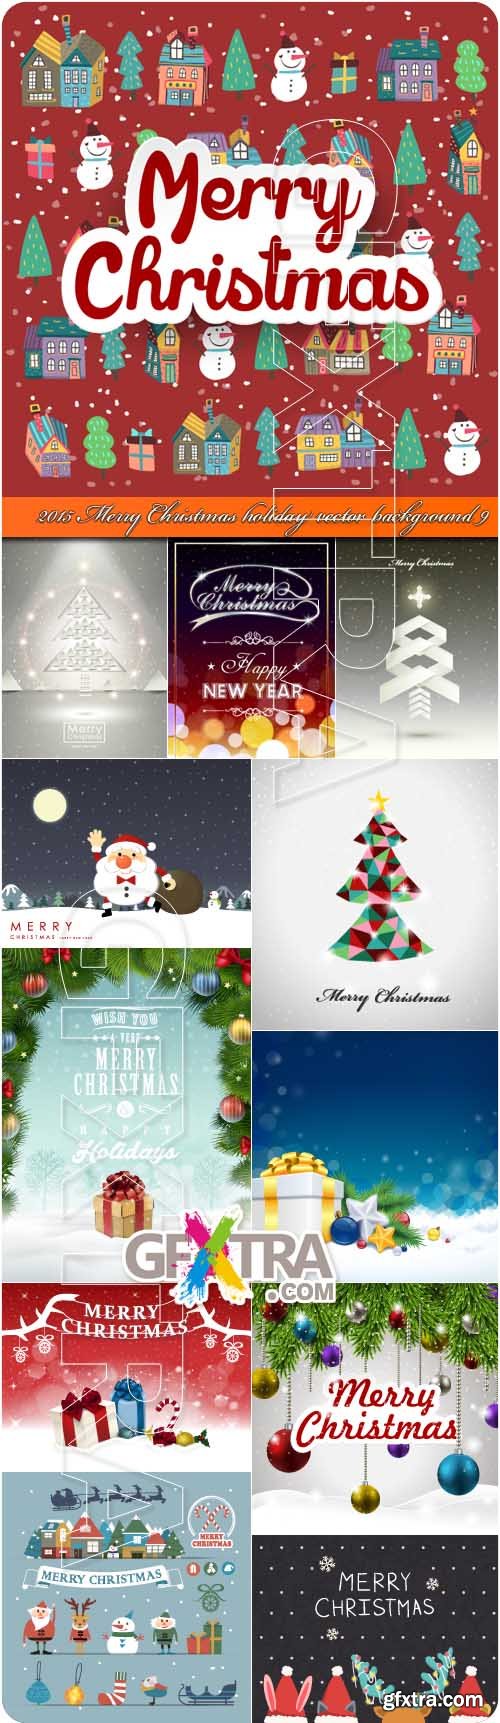 2015 Merry Christmas holiday vector background 9